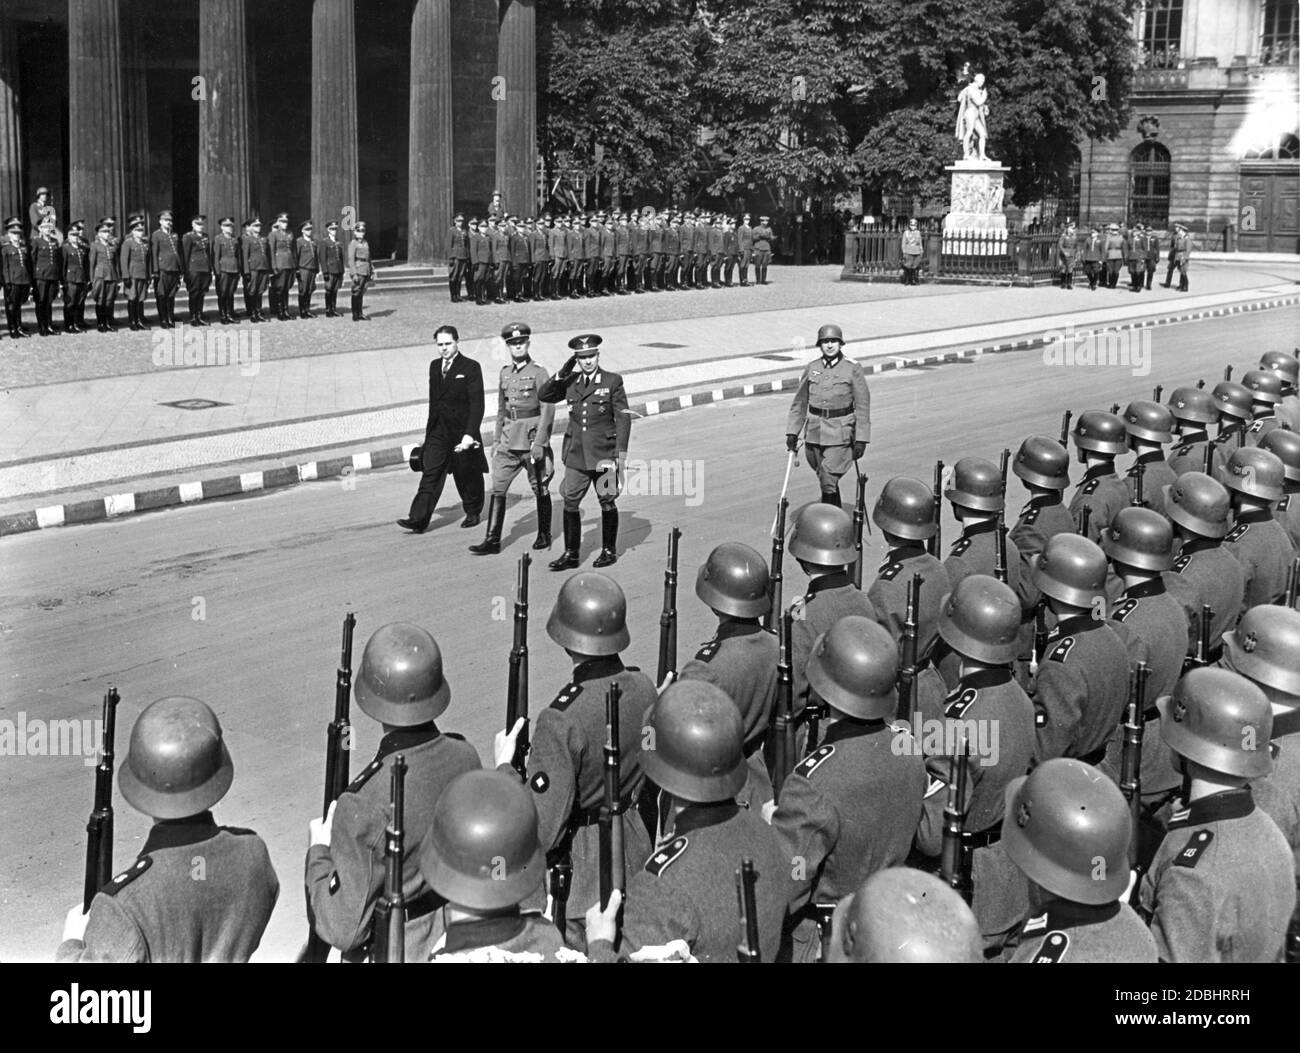 On Thursday afternoon, August 22, 1940, the Slovakian Minister of Defense Ferdinand Catlos (center, saluting) laid a wreath at the memorial on Unter den Linden in Berlin. The picture shows the inspection of the honor company of the Wehrmacht. To the left of Catlos, the city commandant of Berlin Ernst Seifert (center) and the Slovakian envoy in Berlin Matus Cernak are walking. Stock Photo